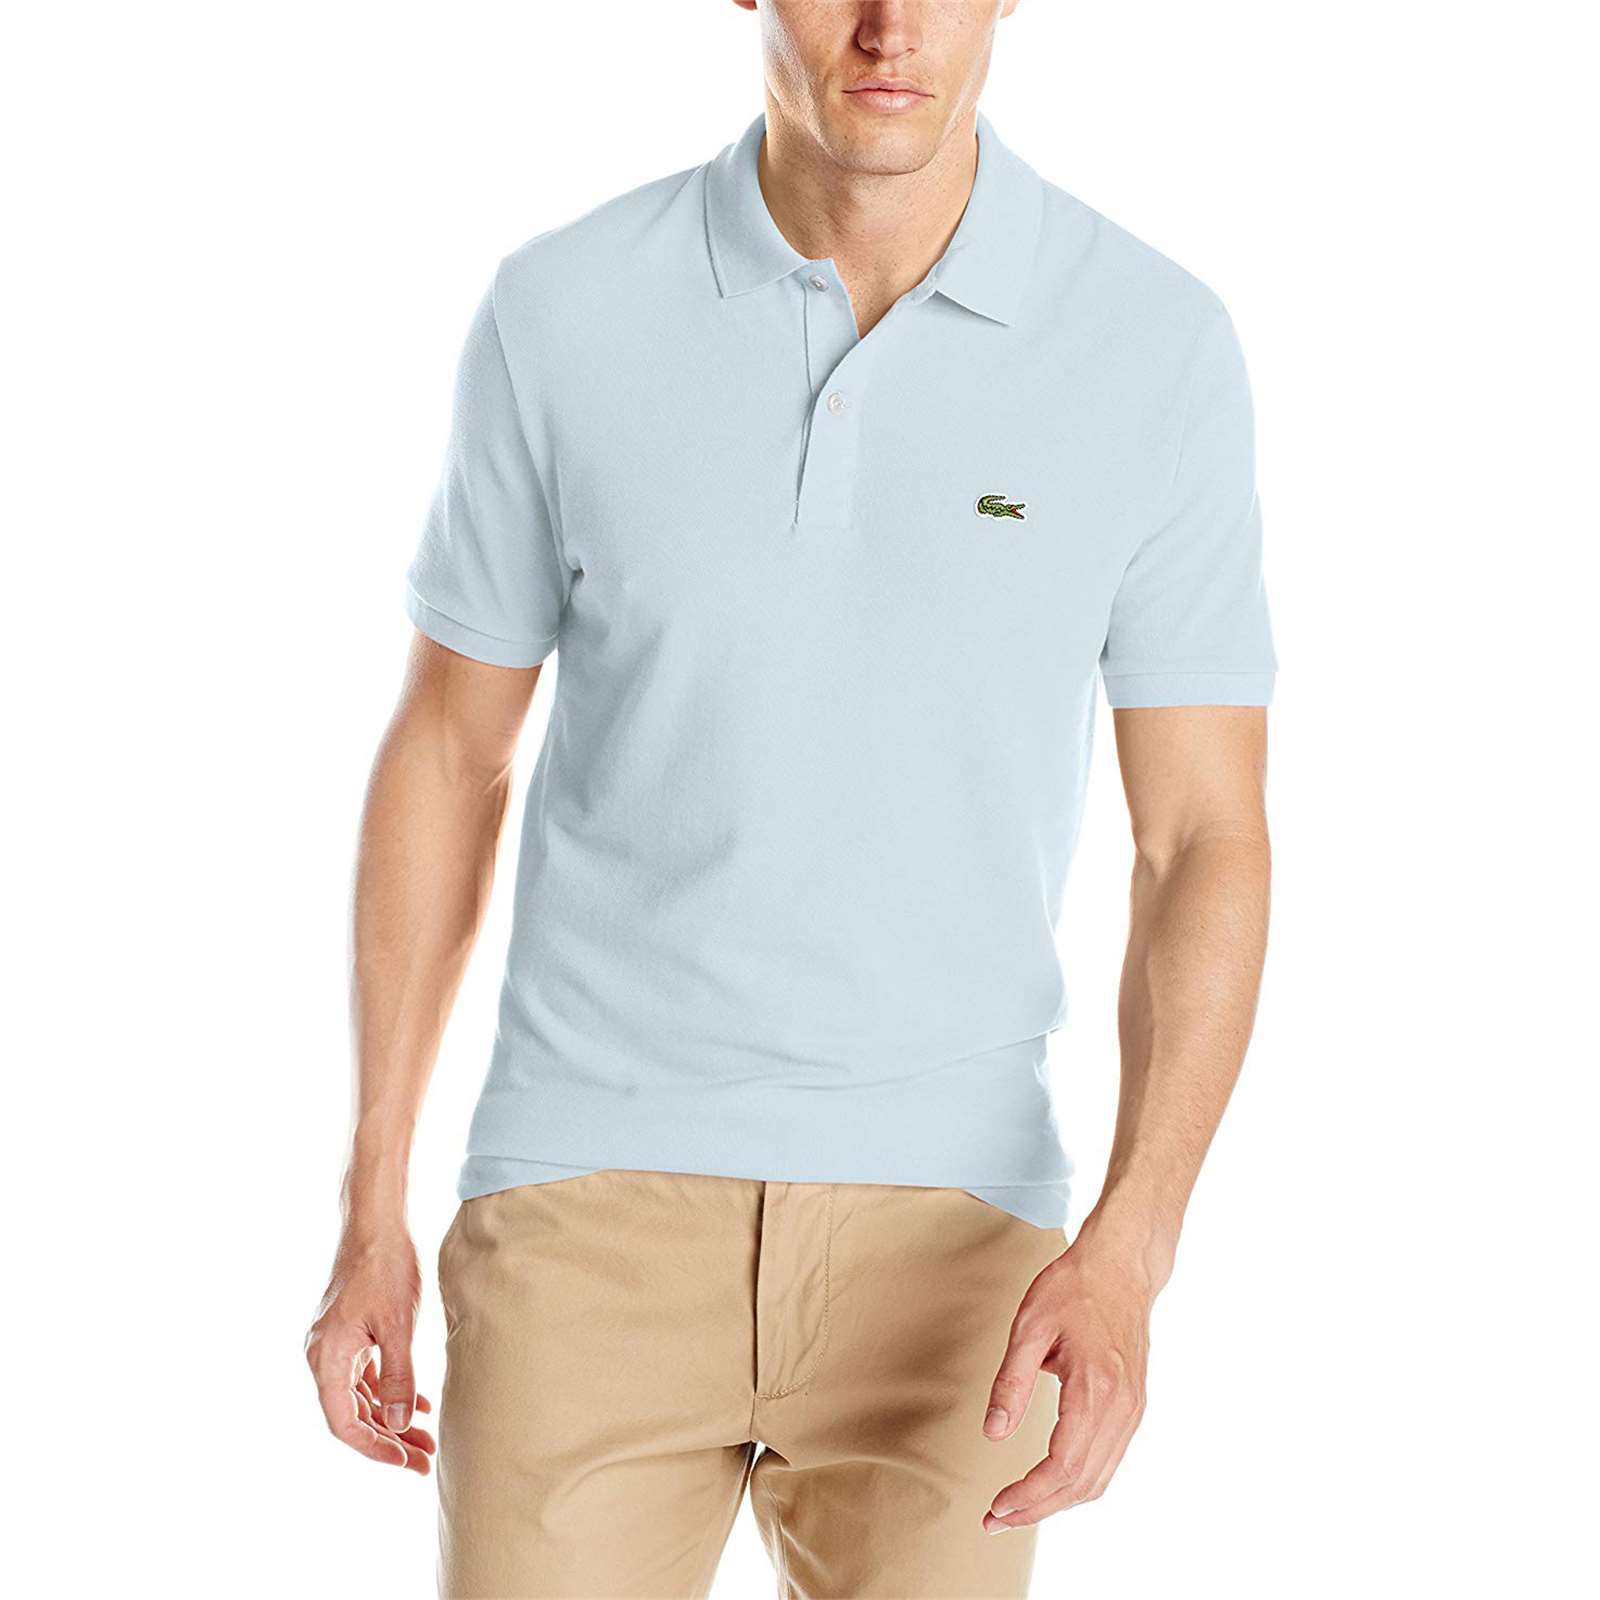 Lacoste Men Classic Pique Slim Fit Short Sleeve Polo - image 1 of 2